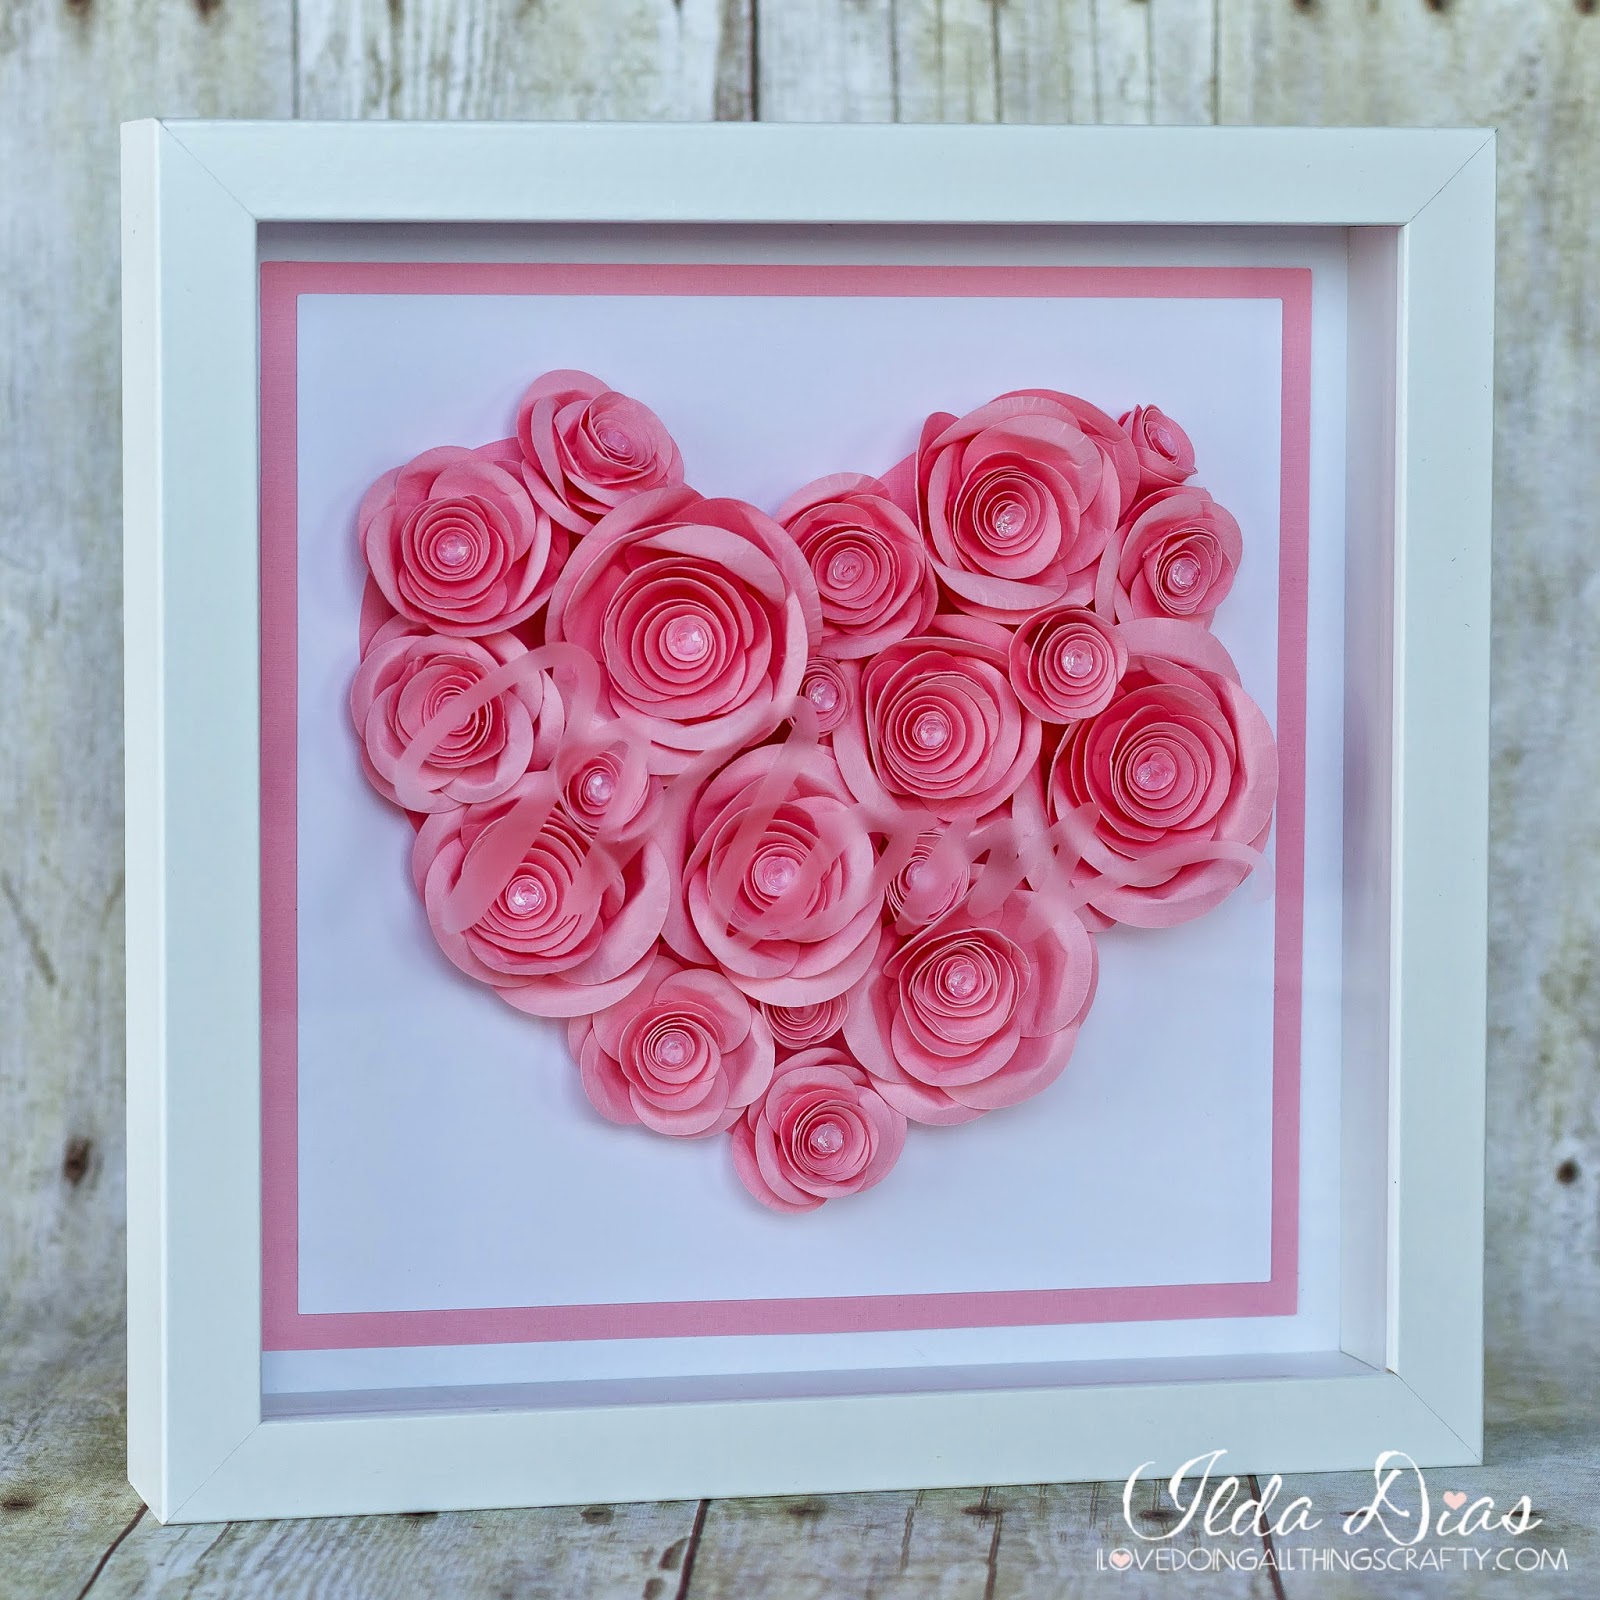 Download I Love Doing All Things Crafty: Mother's Day Shadow Box